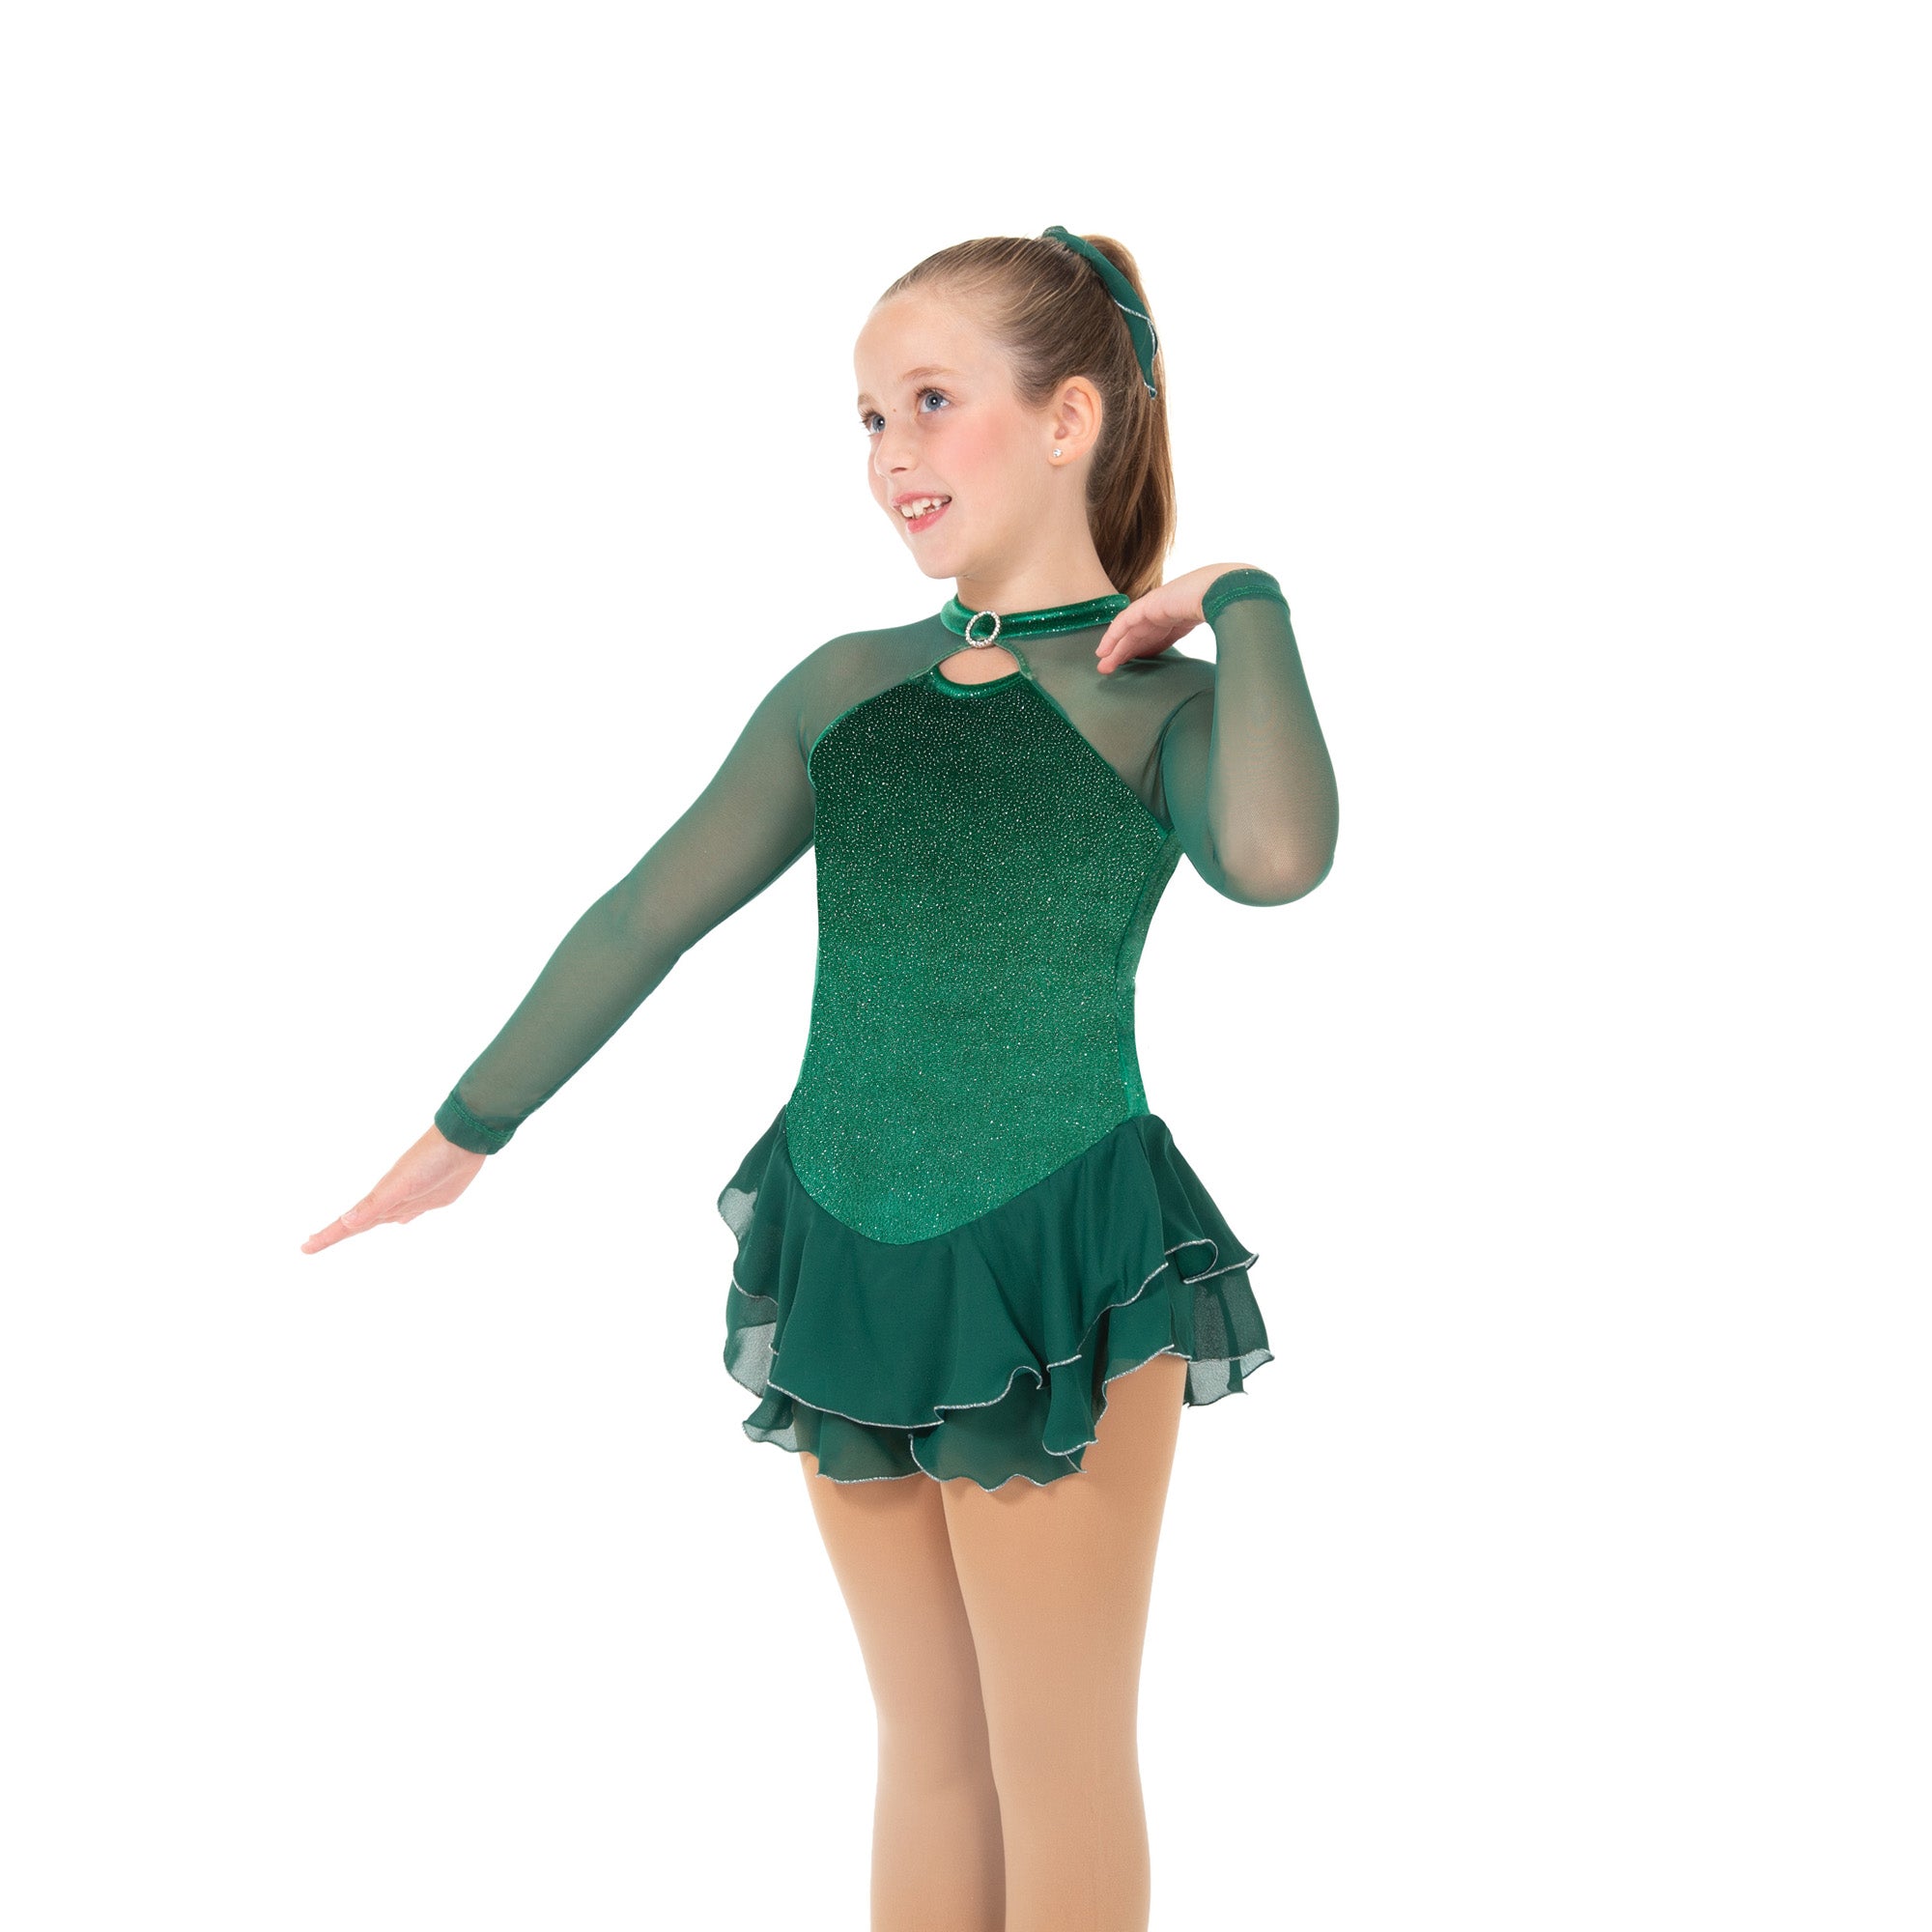 645 Shimmer Skating Dress in Green by Jerry's